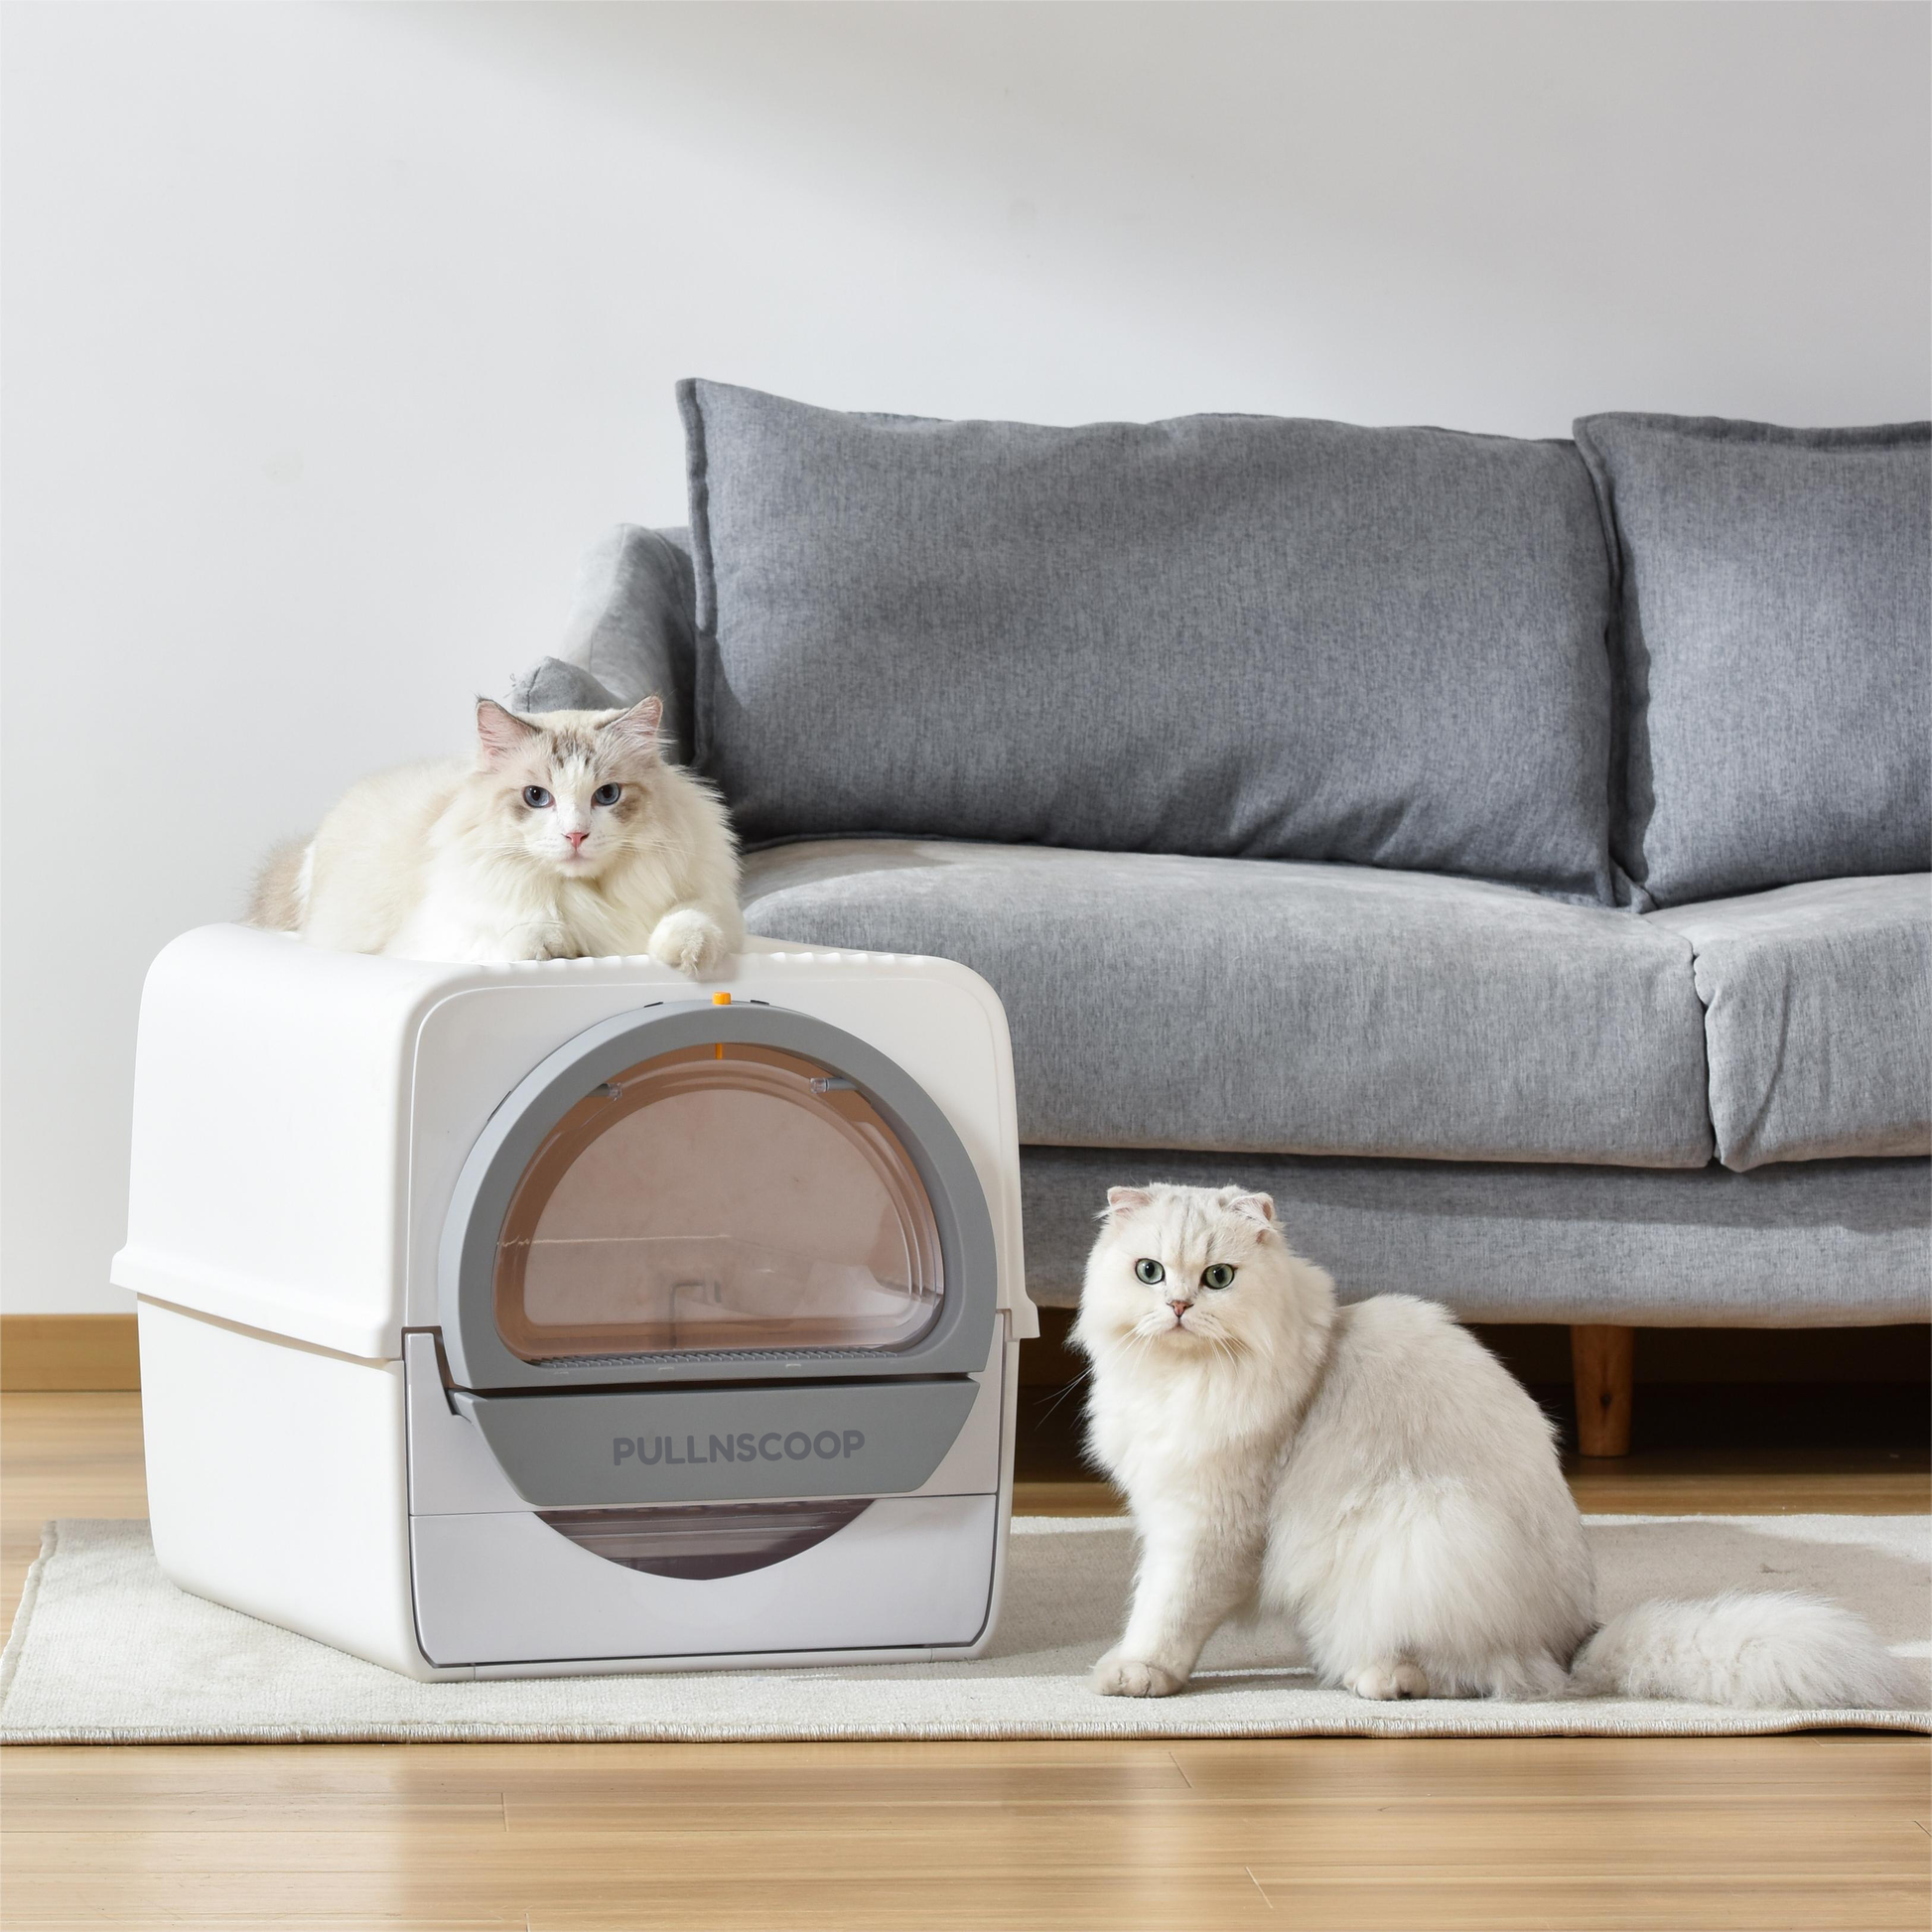 PULLNSCOOP Litter Box-Reconditioned